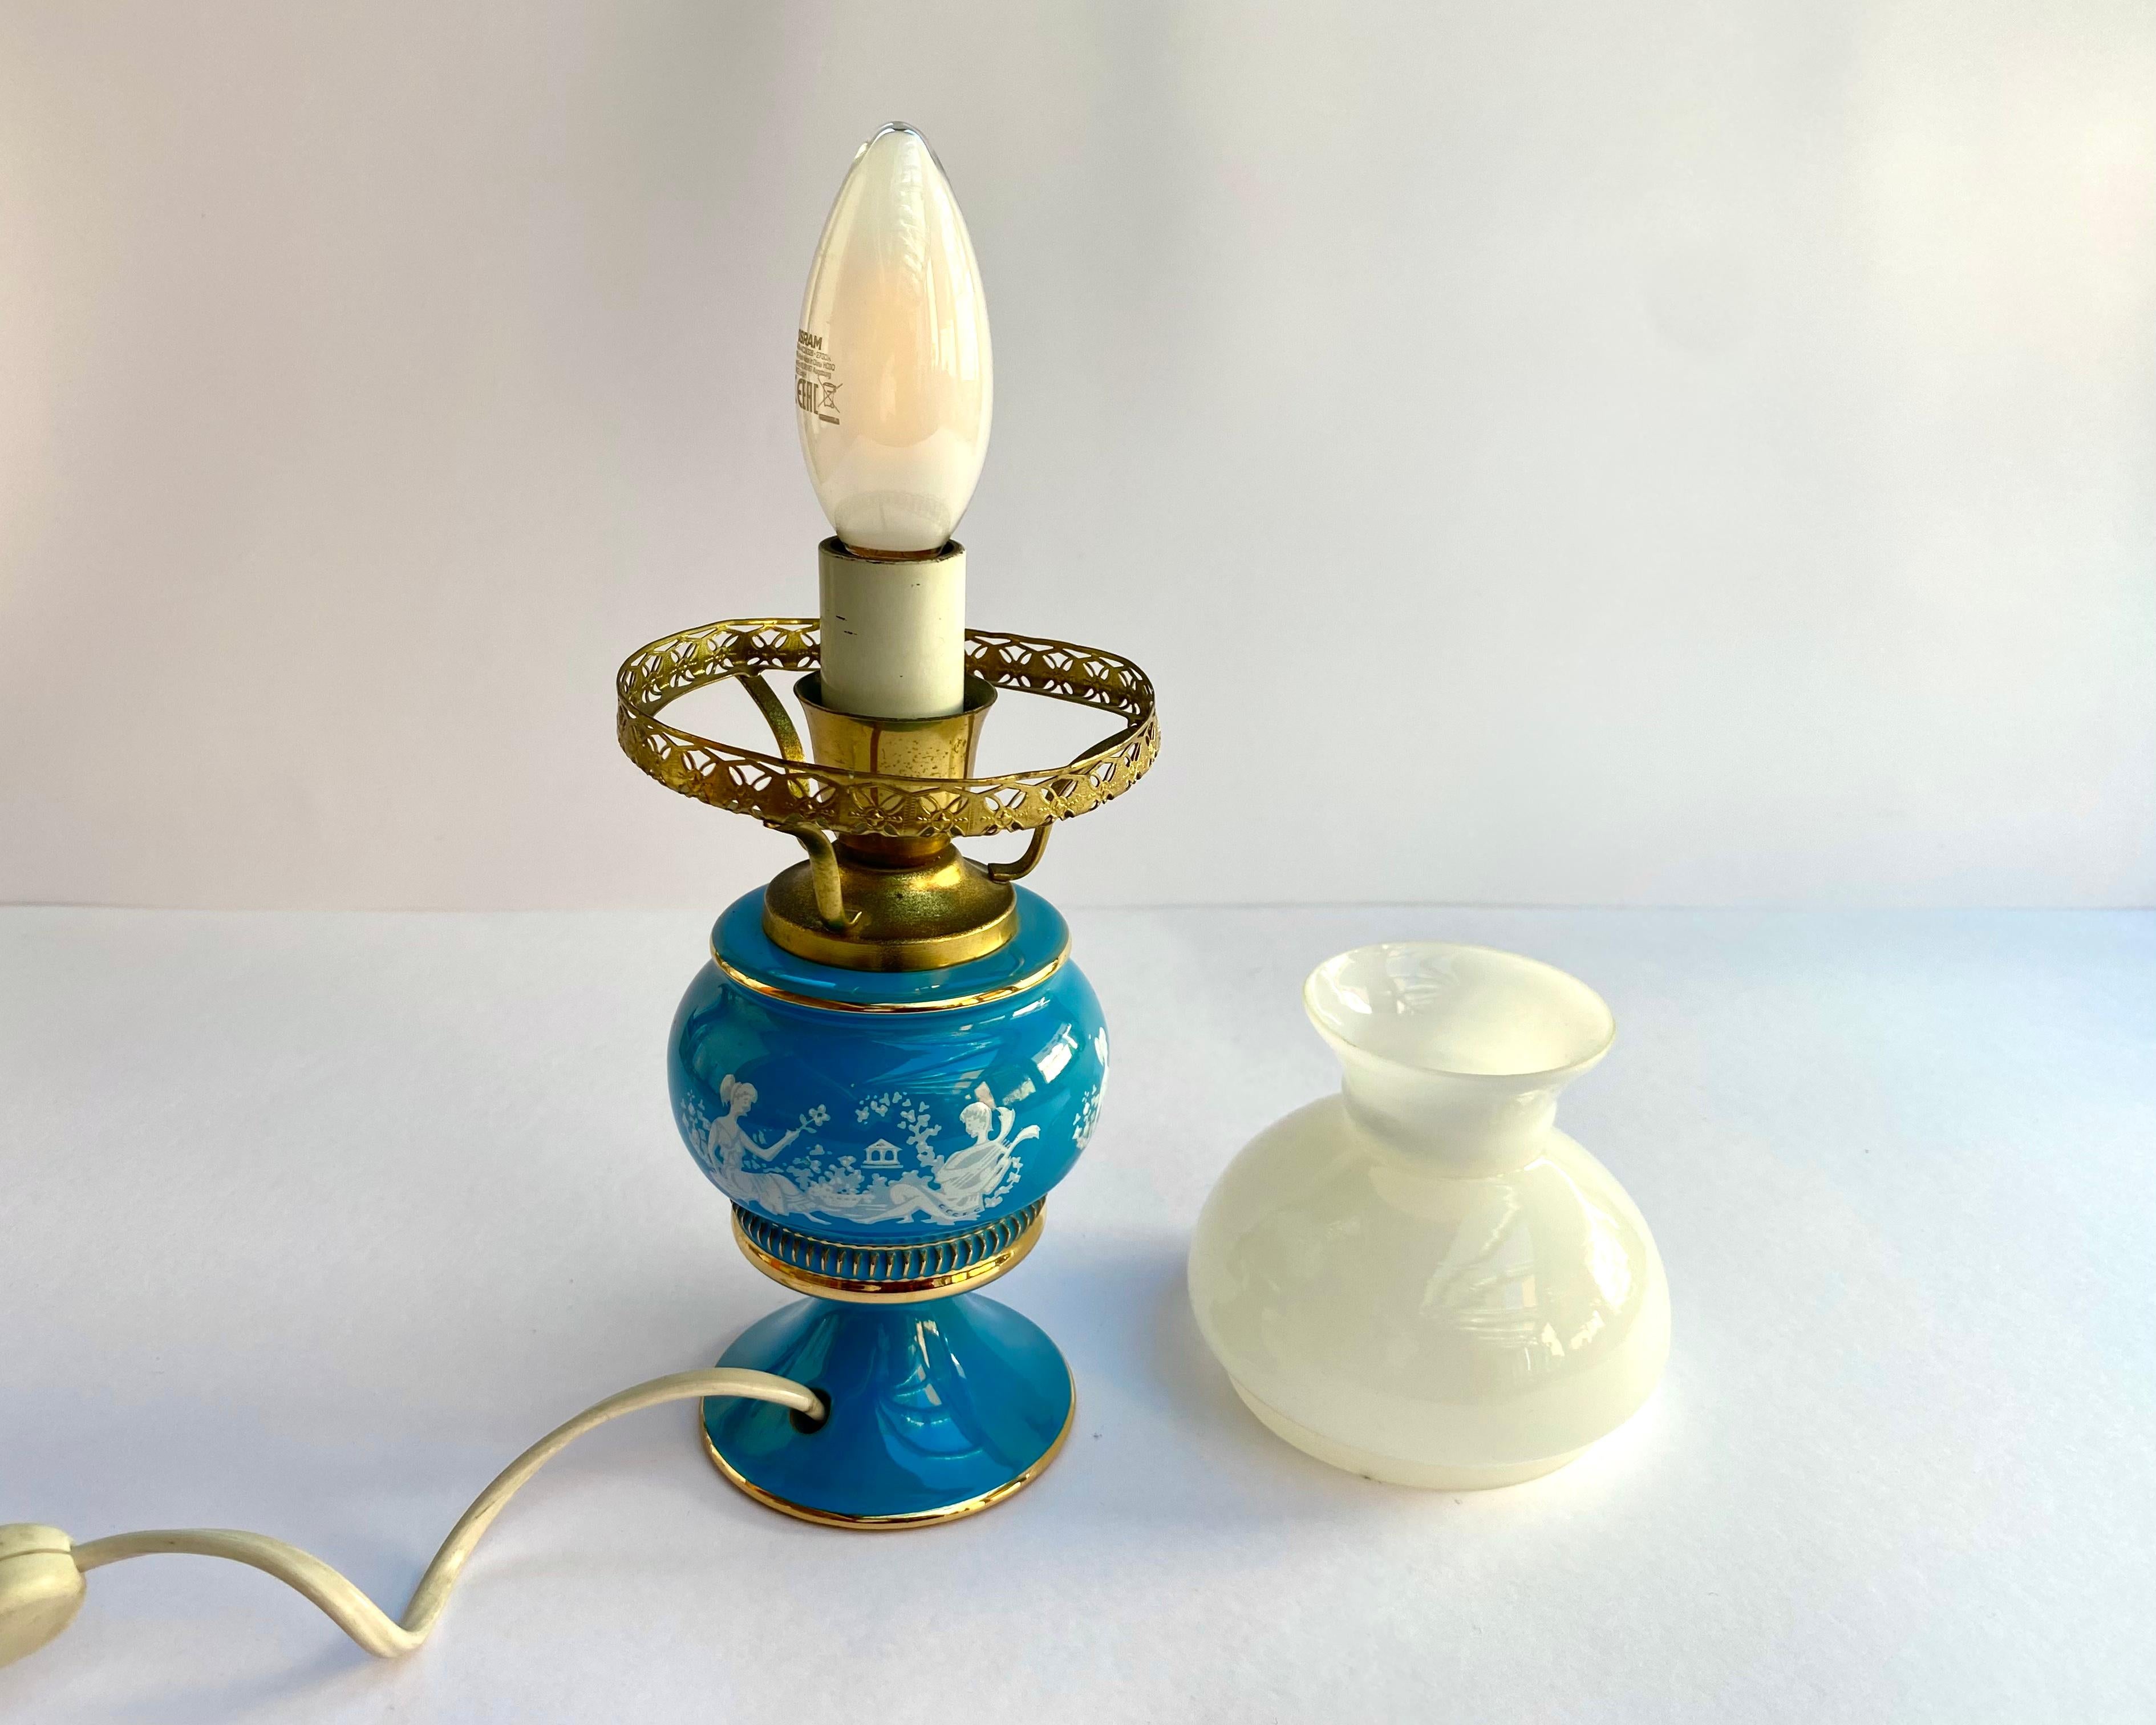 Vintage Table Lamp Made in Italy RUEI FLORENTINE Couple in Love Scene Hand Carved Bedside Lighting Lamp.

Vintage Table Lamp with glass shade RUEI FLORENTINE, Italy, 1960s.

The kerosene lamp style table lamp is made of hand carved blue porcelain,